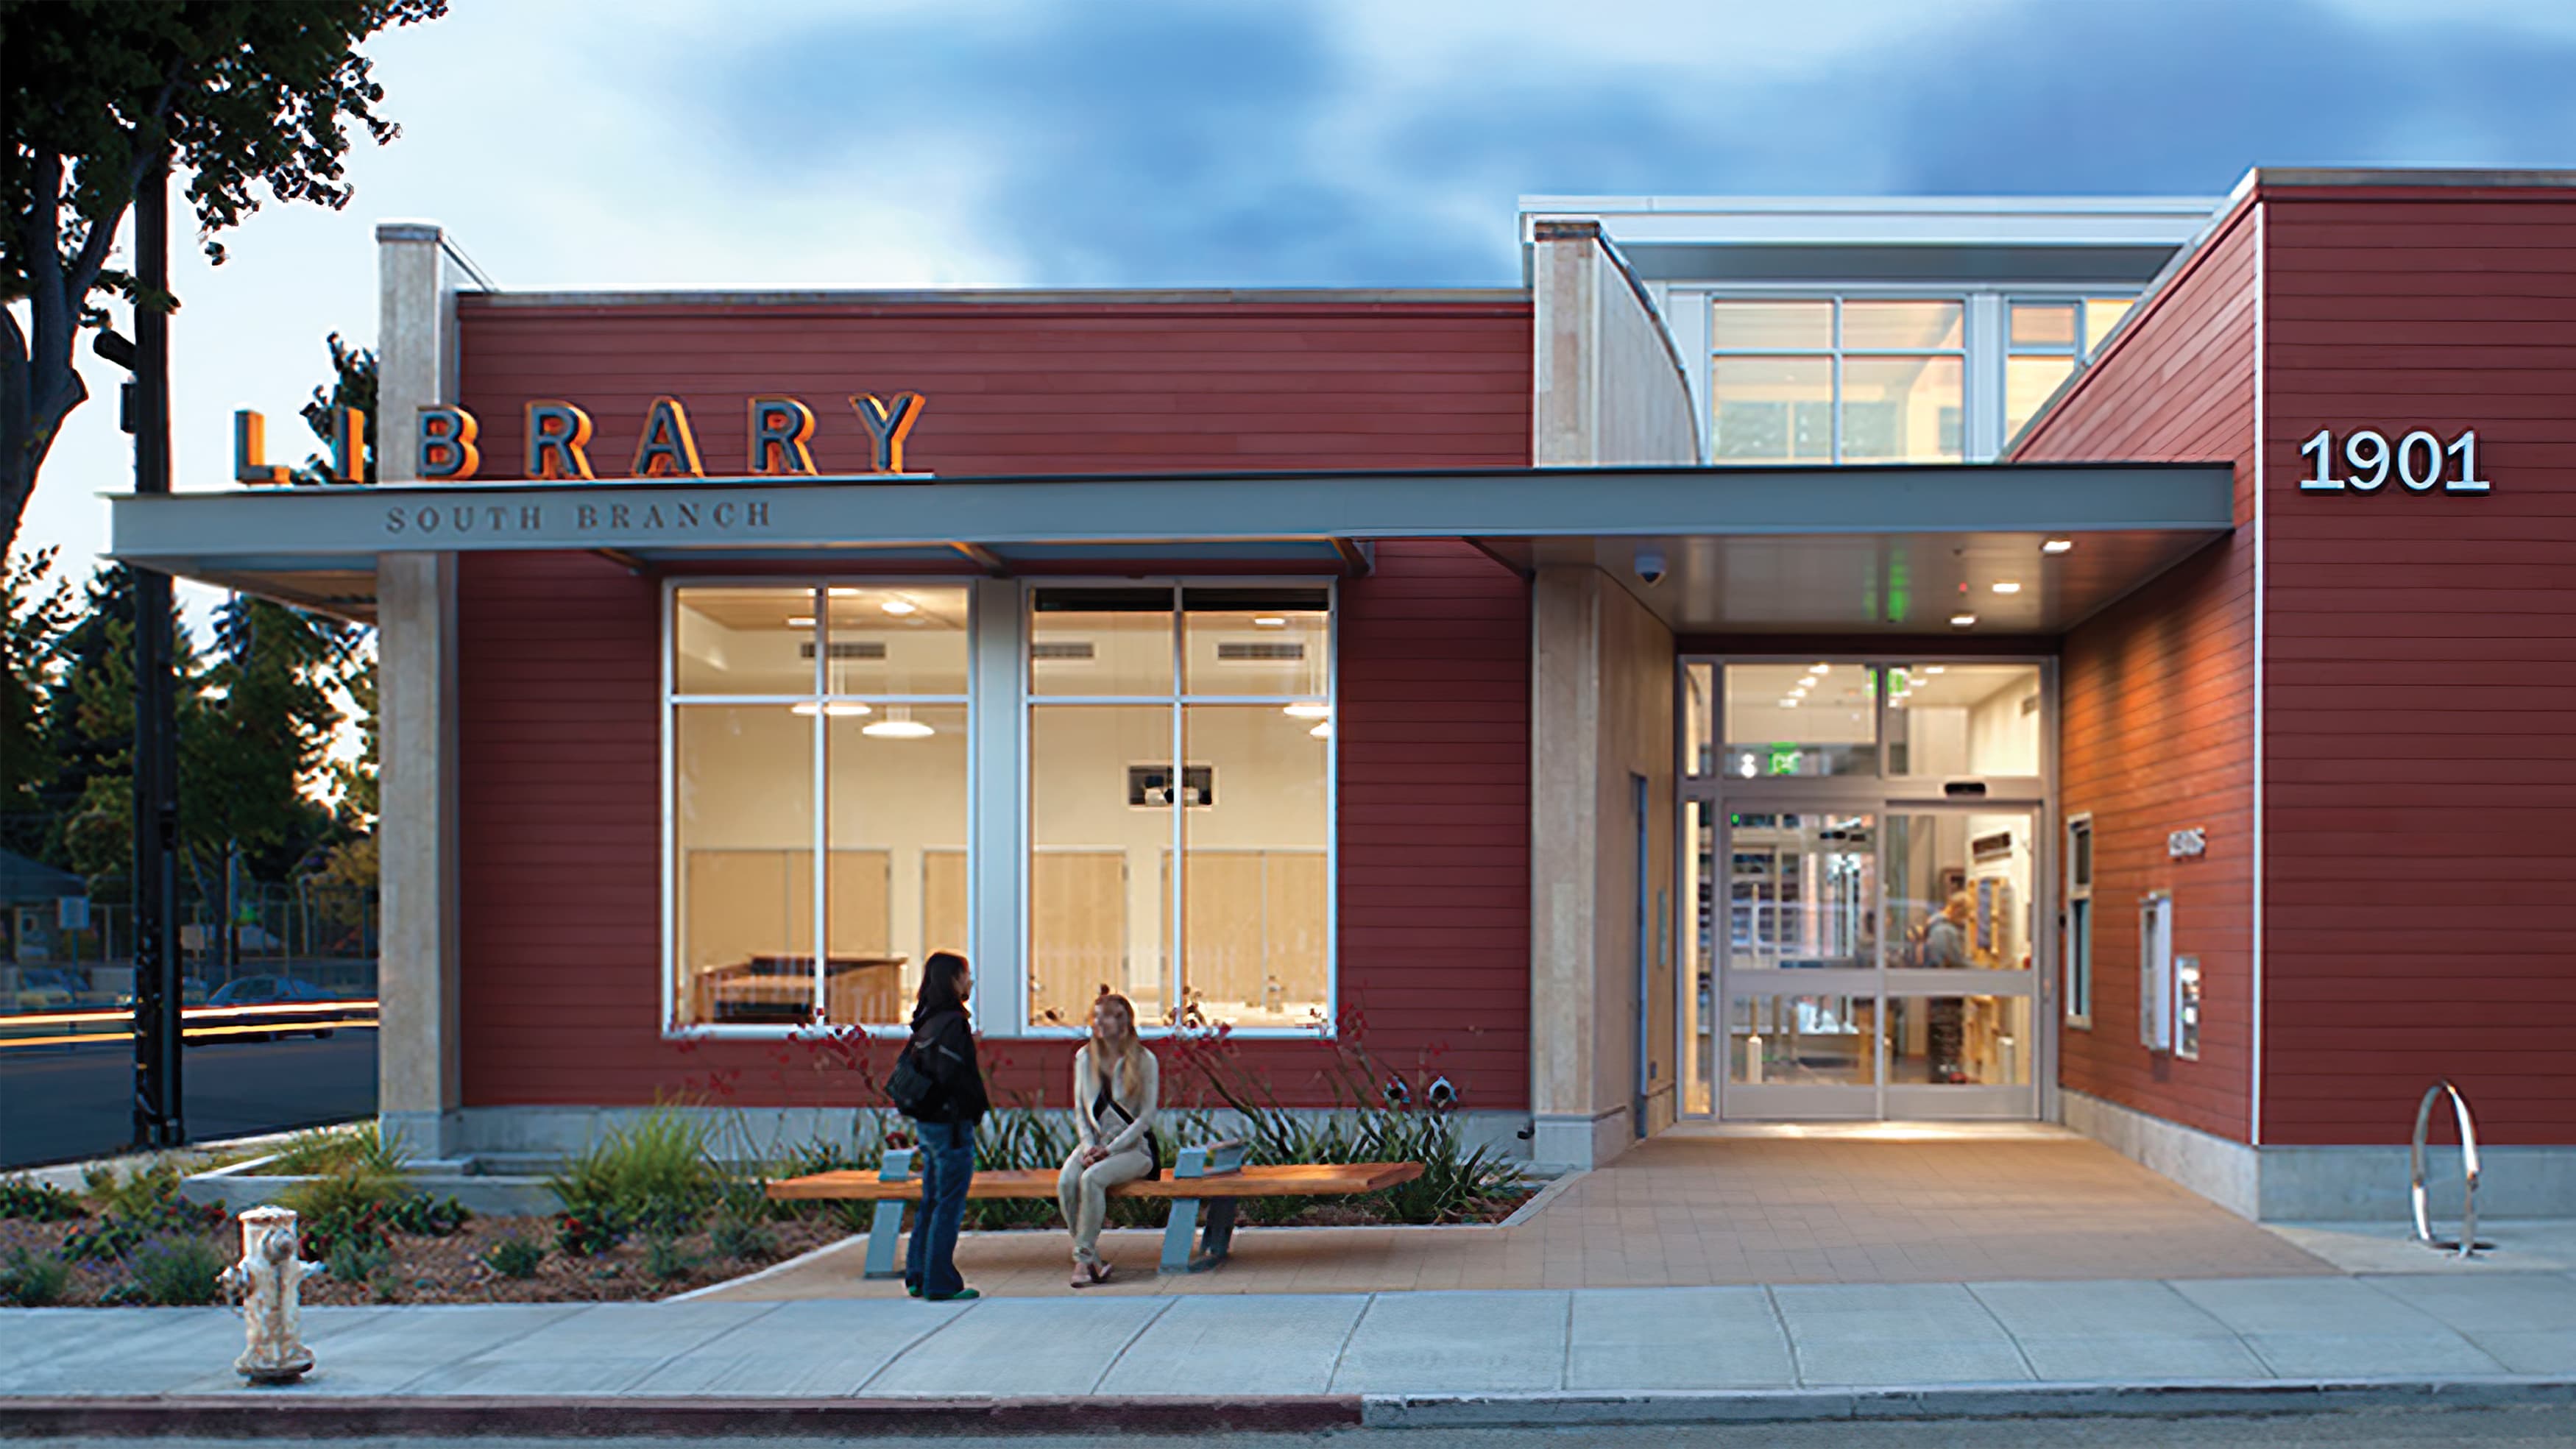 A photograph of the Berkeley Public Library South Branch's main identity sign.